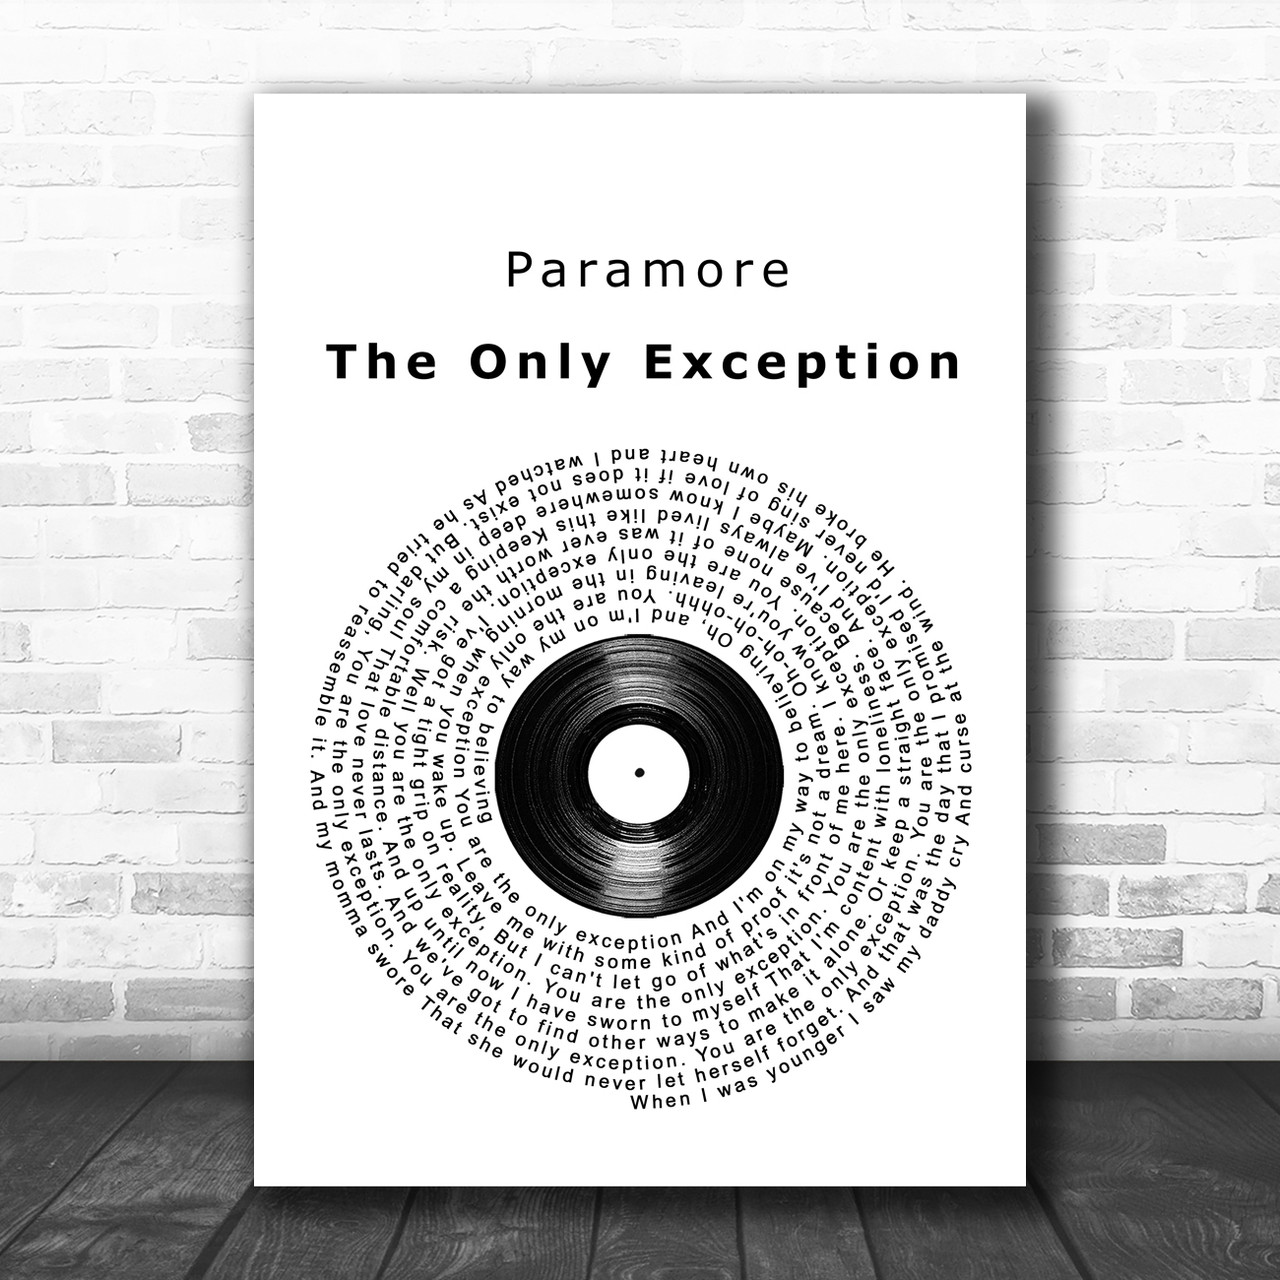 Quoted - Artista: Paramore Música: The Only Exception